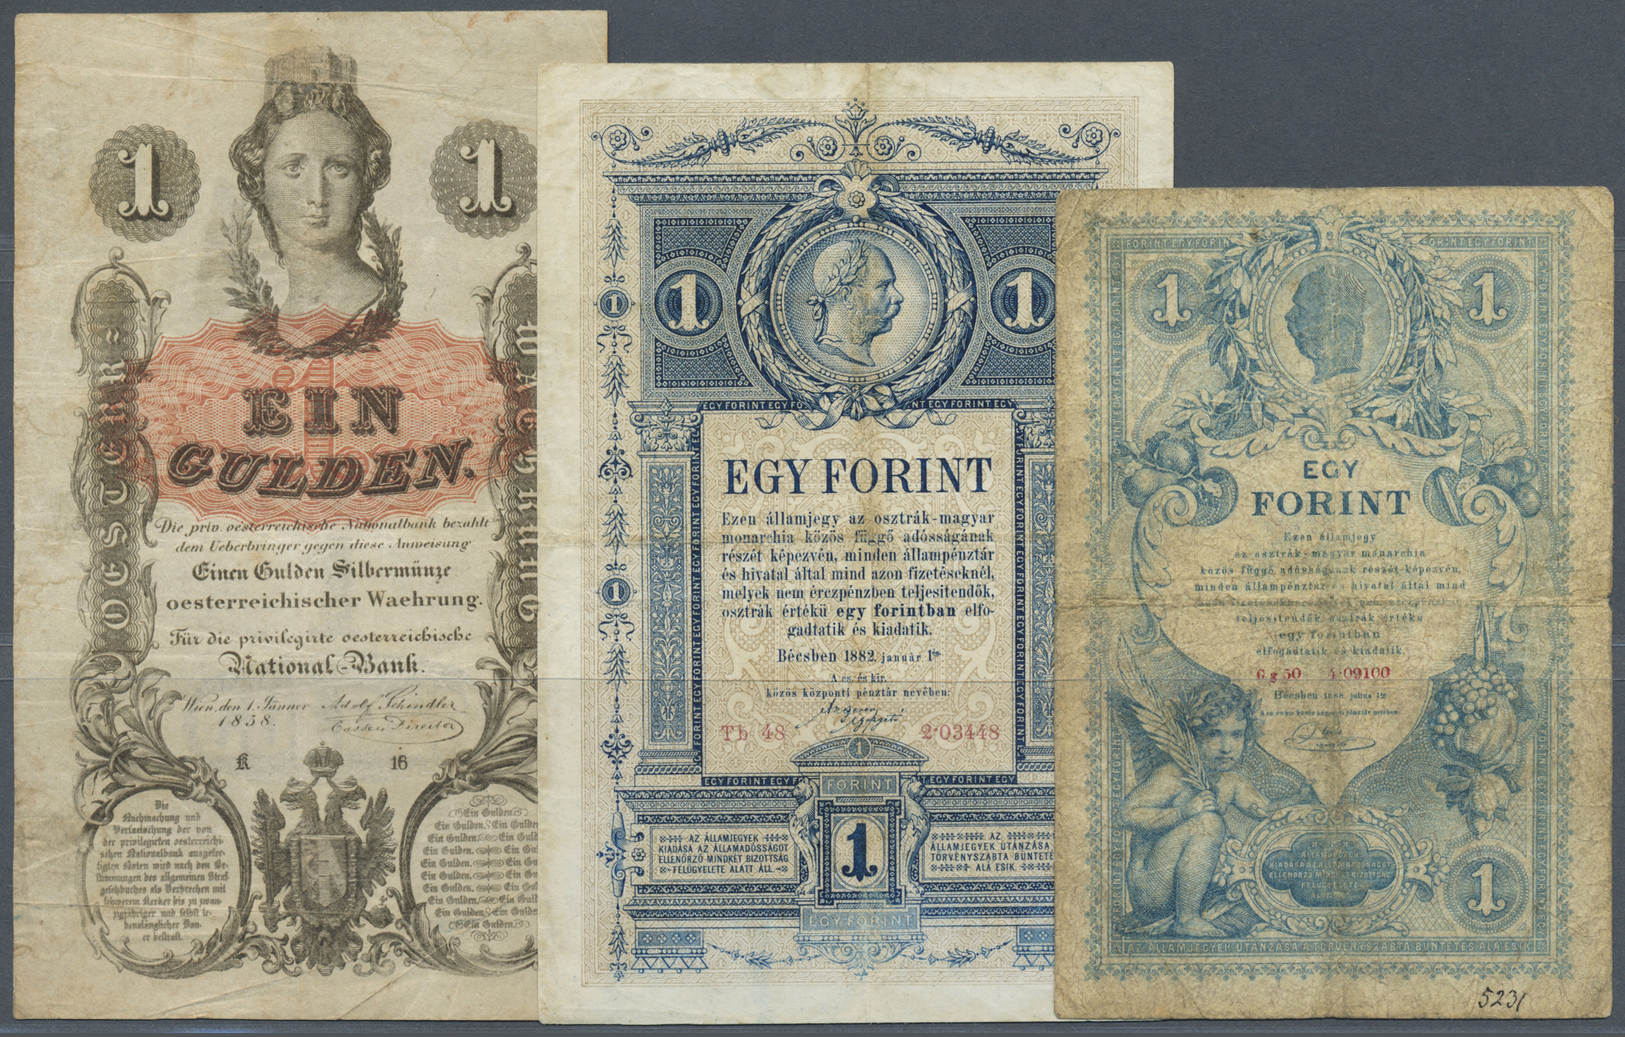 00134 Austria / Österreich: Set Of 3 Notes Containing 1 Gulden 1858, 1882, 1881 P. A84, A153, A156, All Used With Folds - Austria